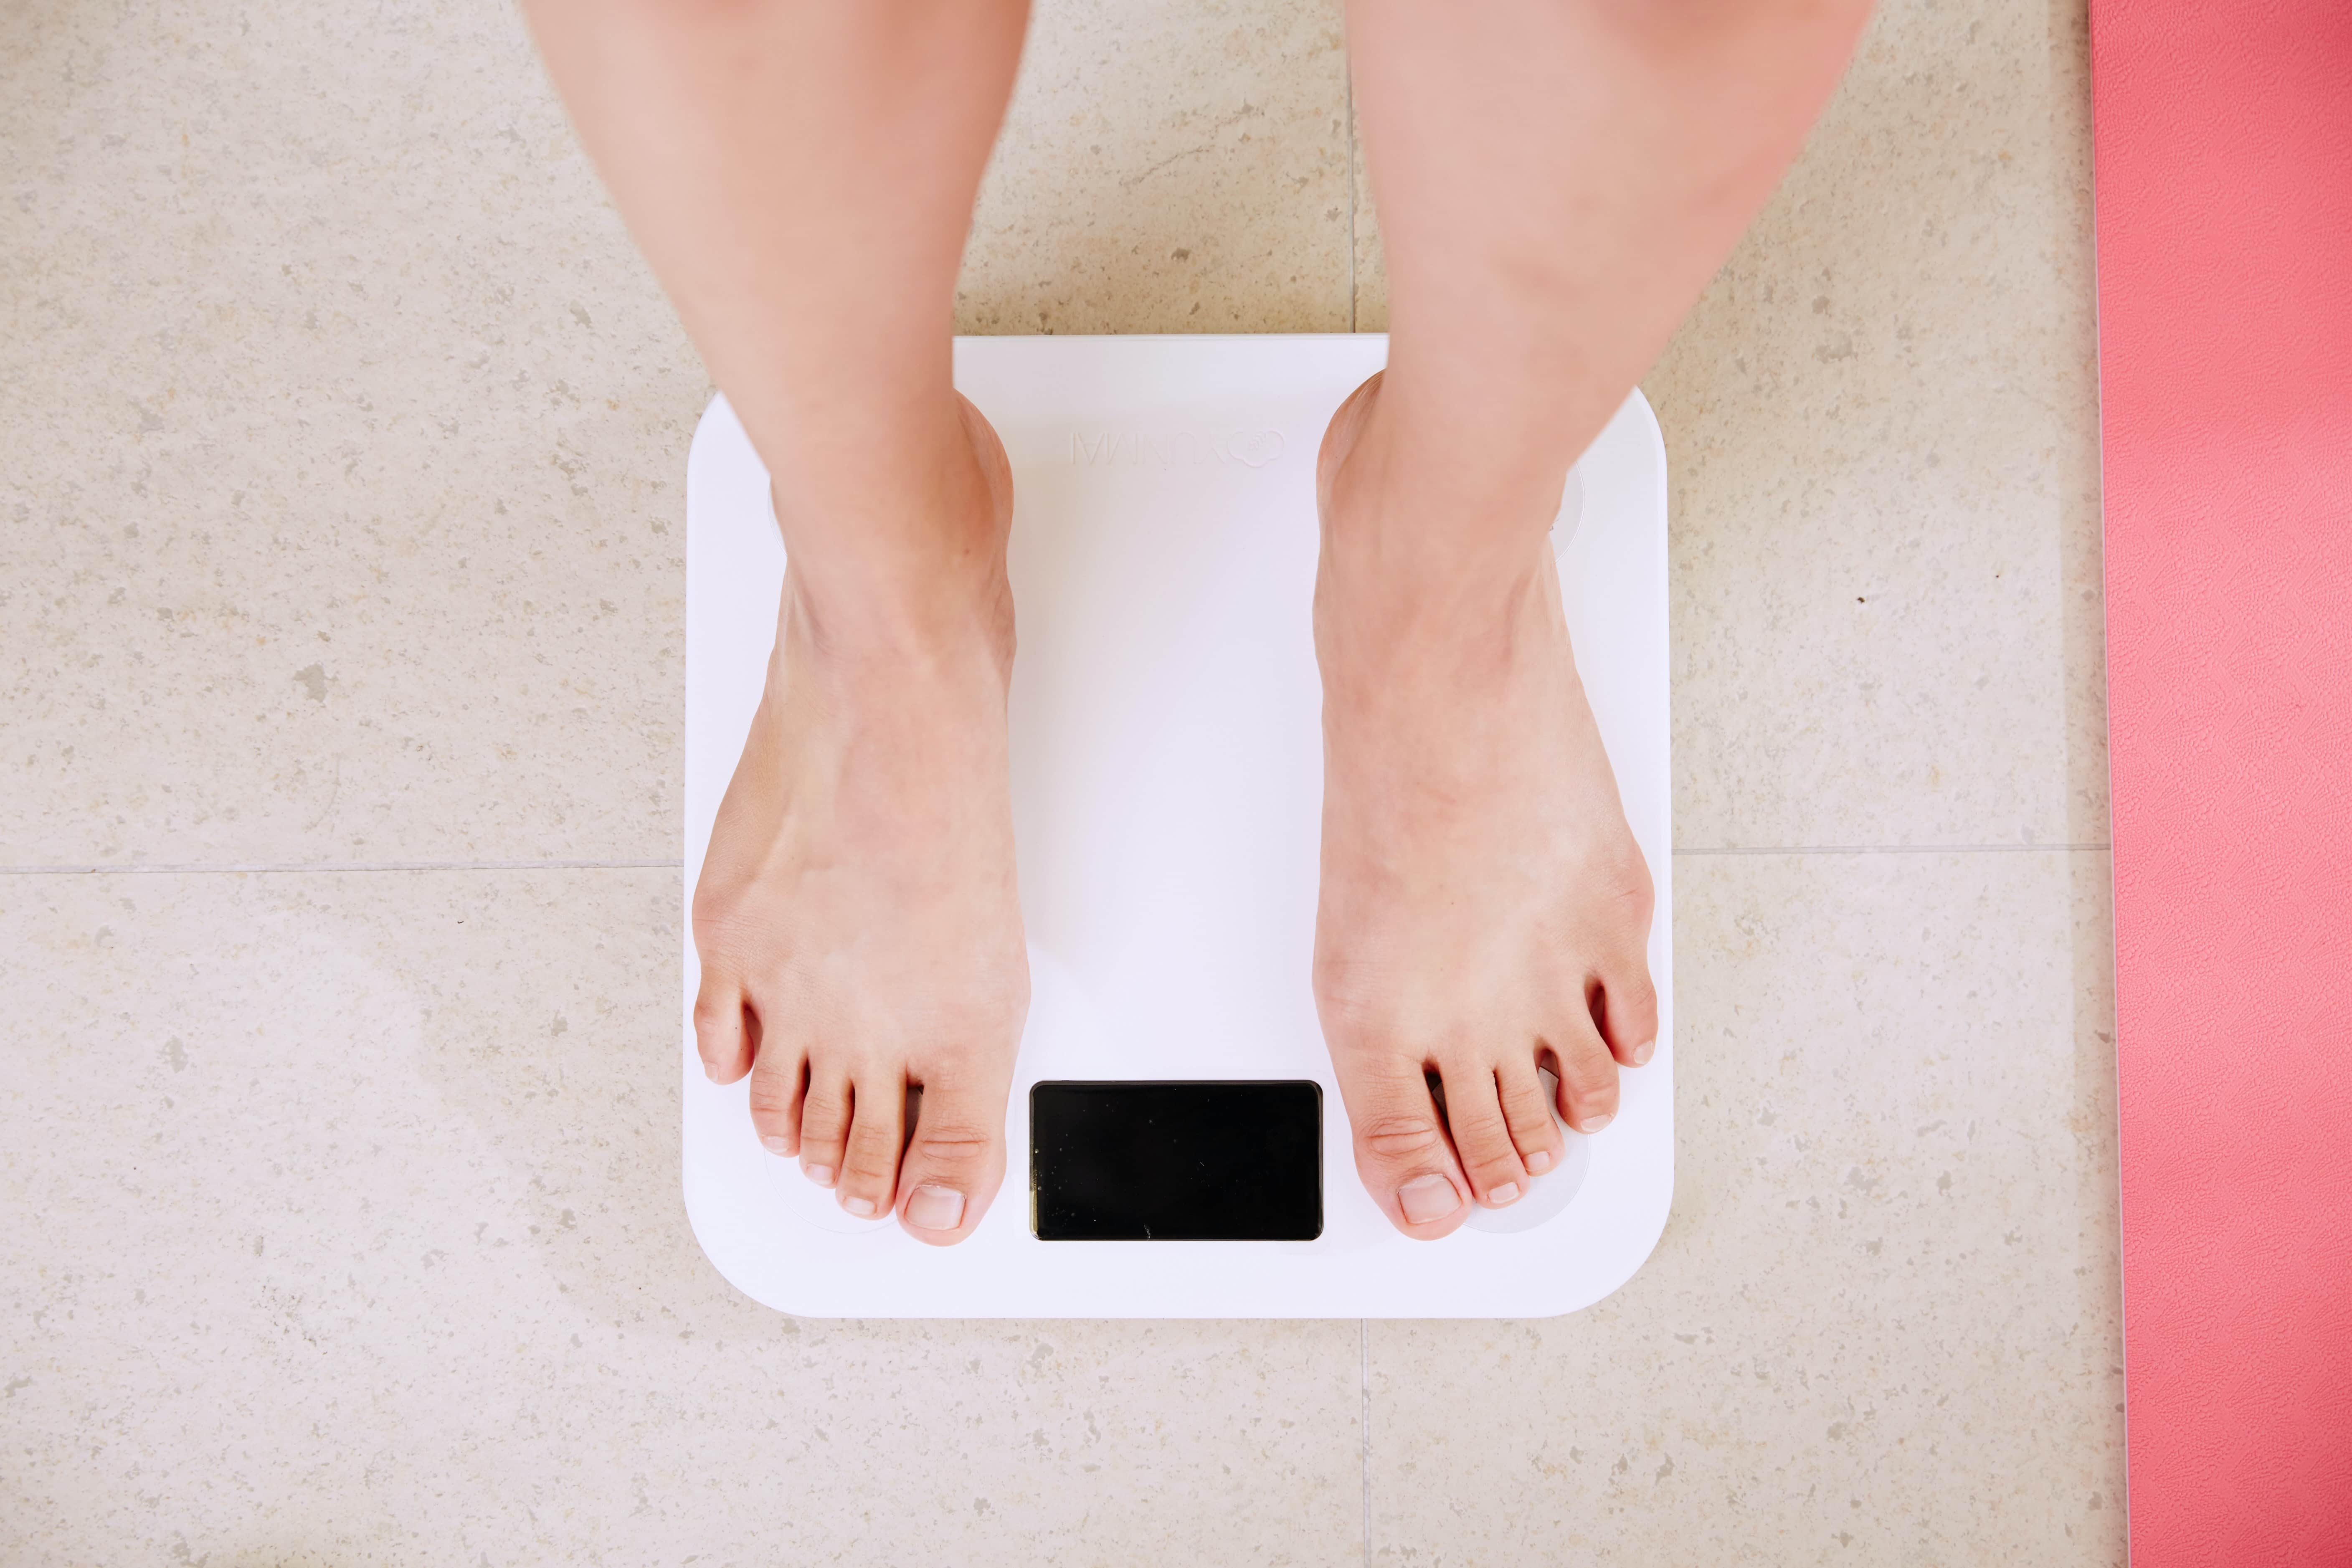 hypnosis for weight loss Ottawa